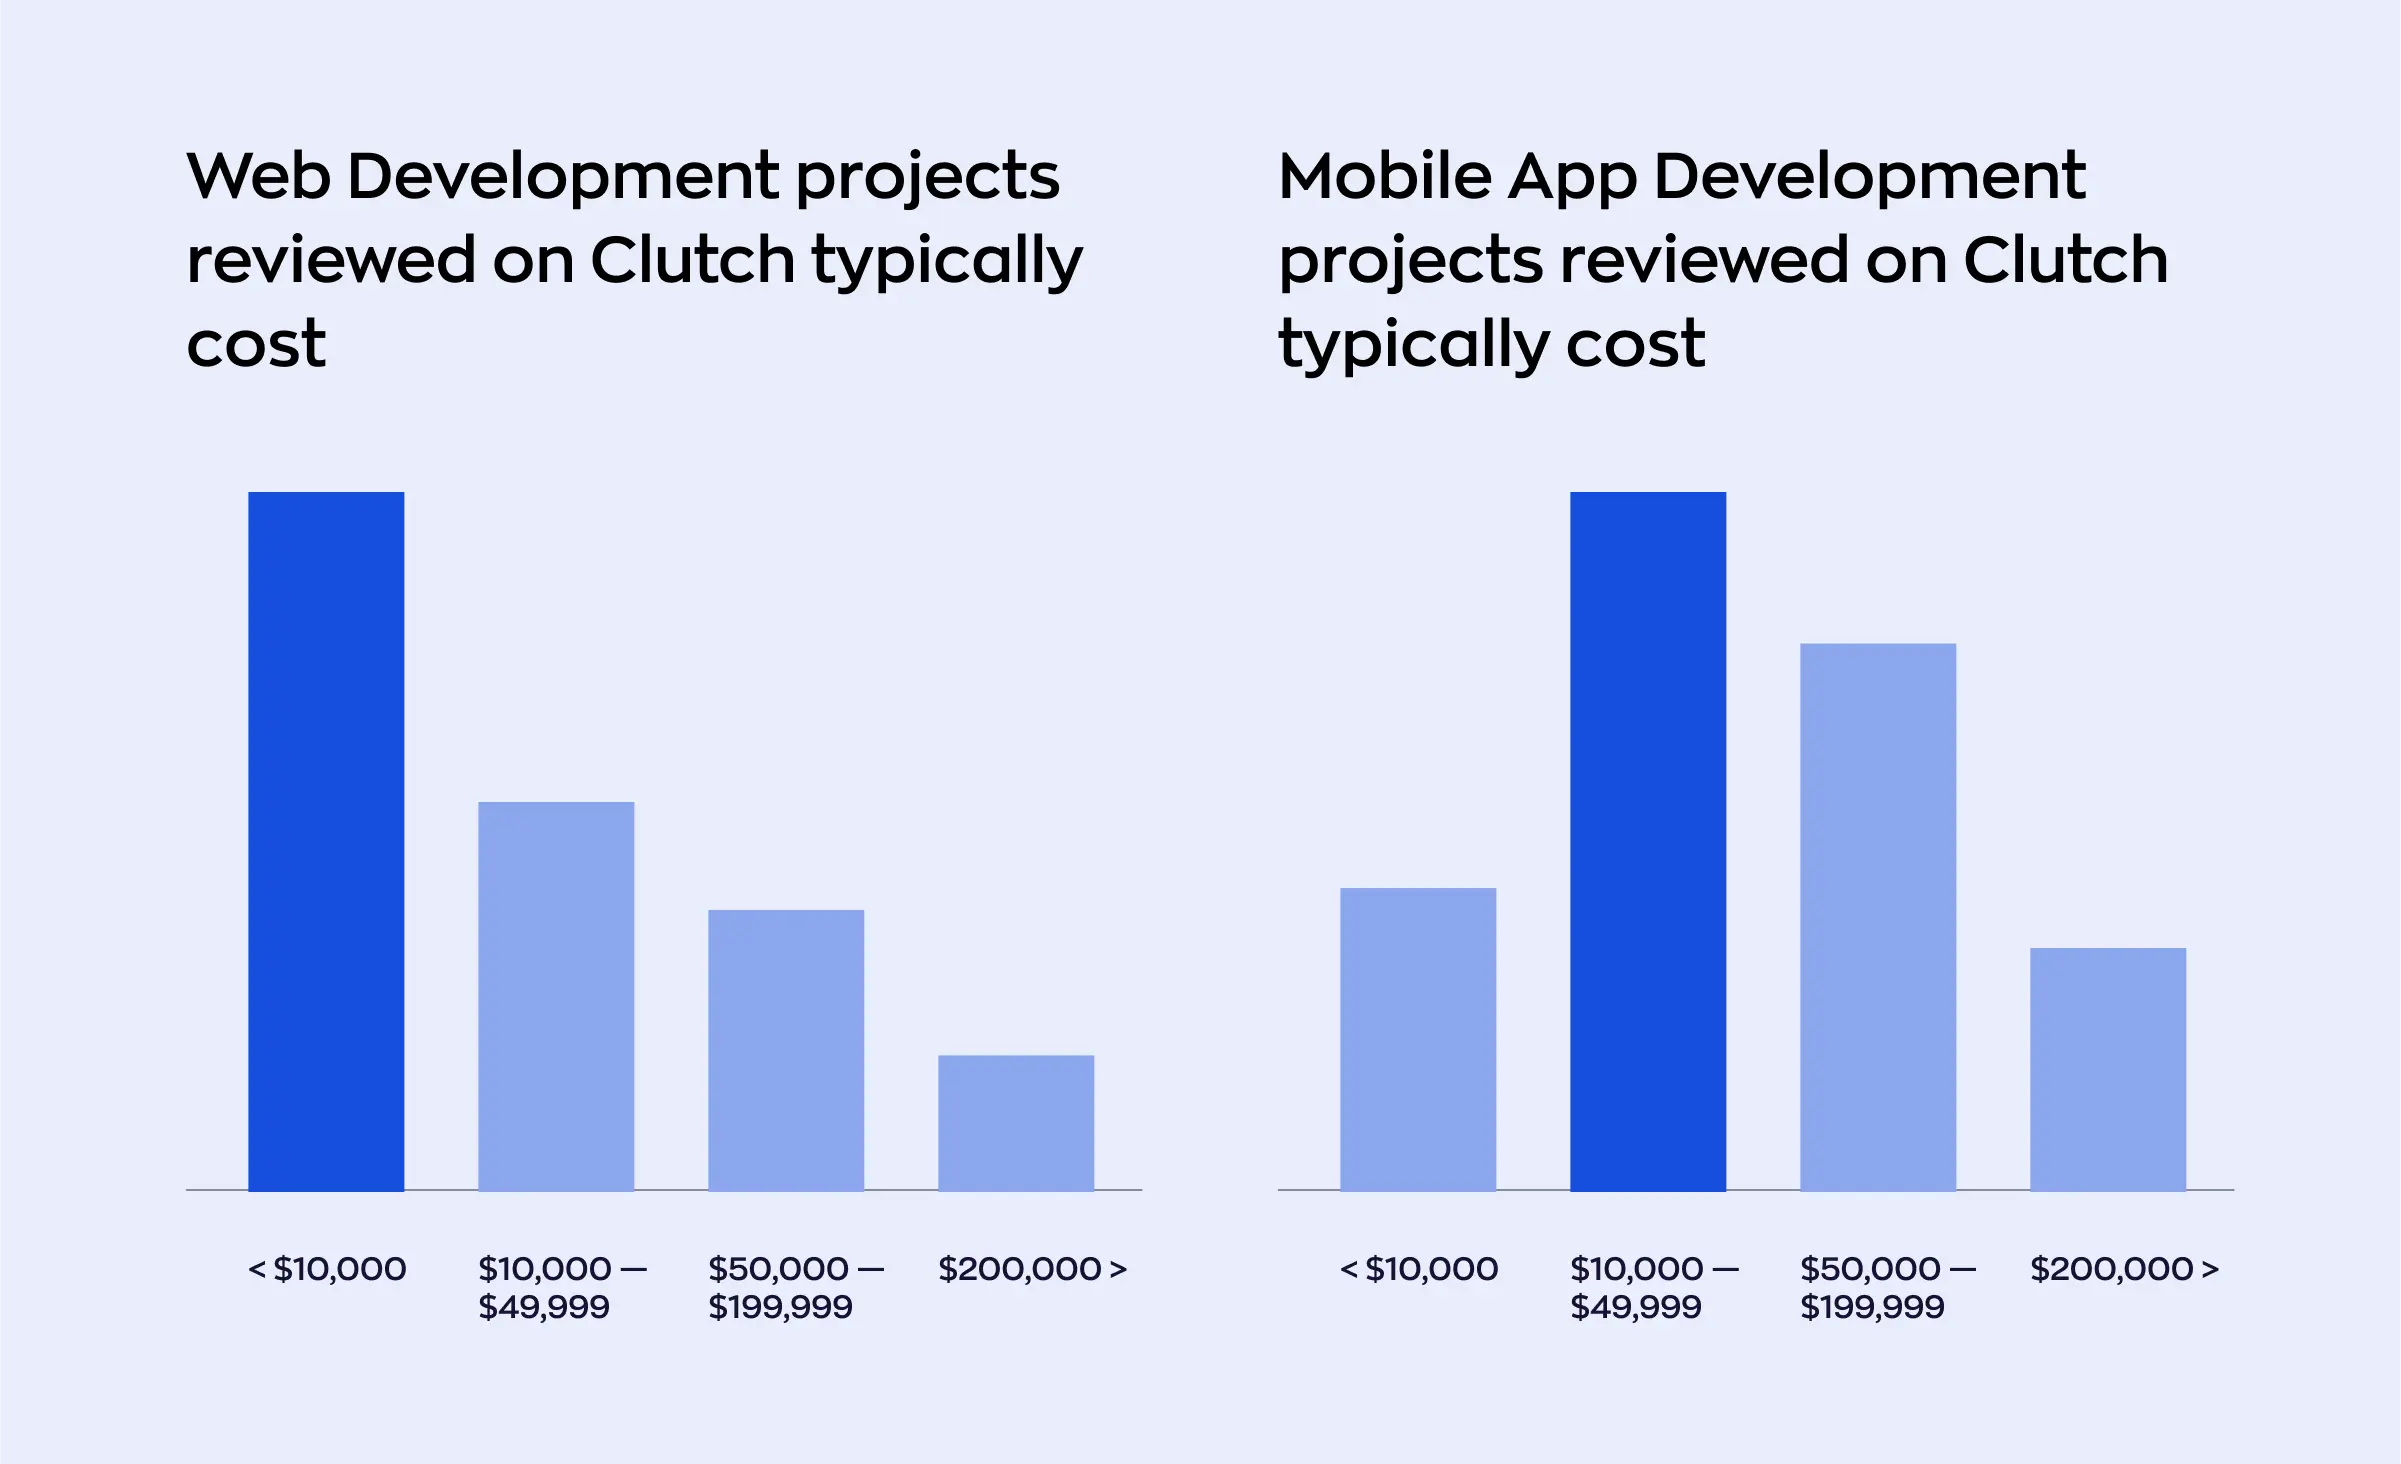 App development cost for mobile and web projects on Clutch